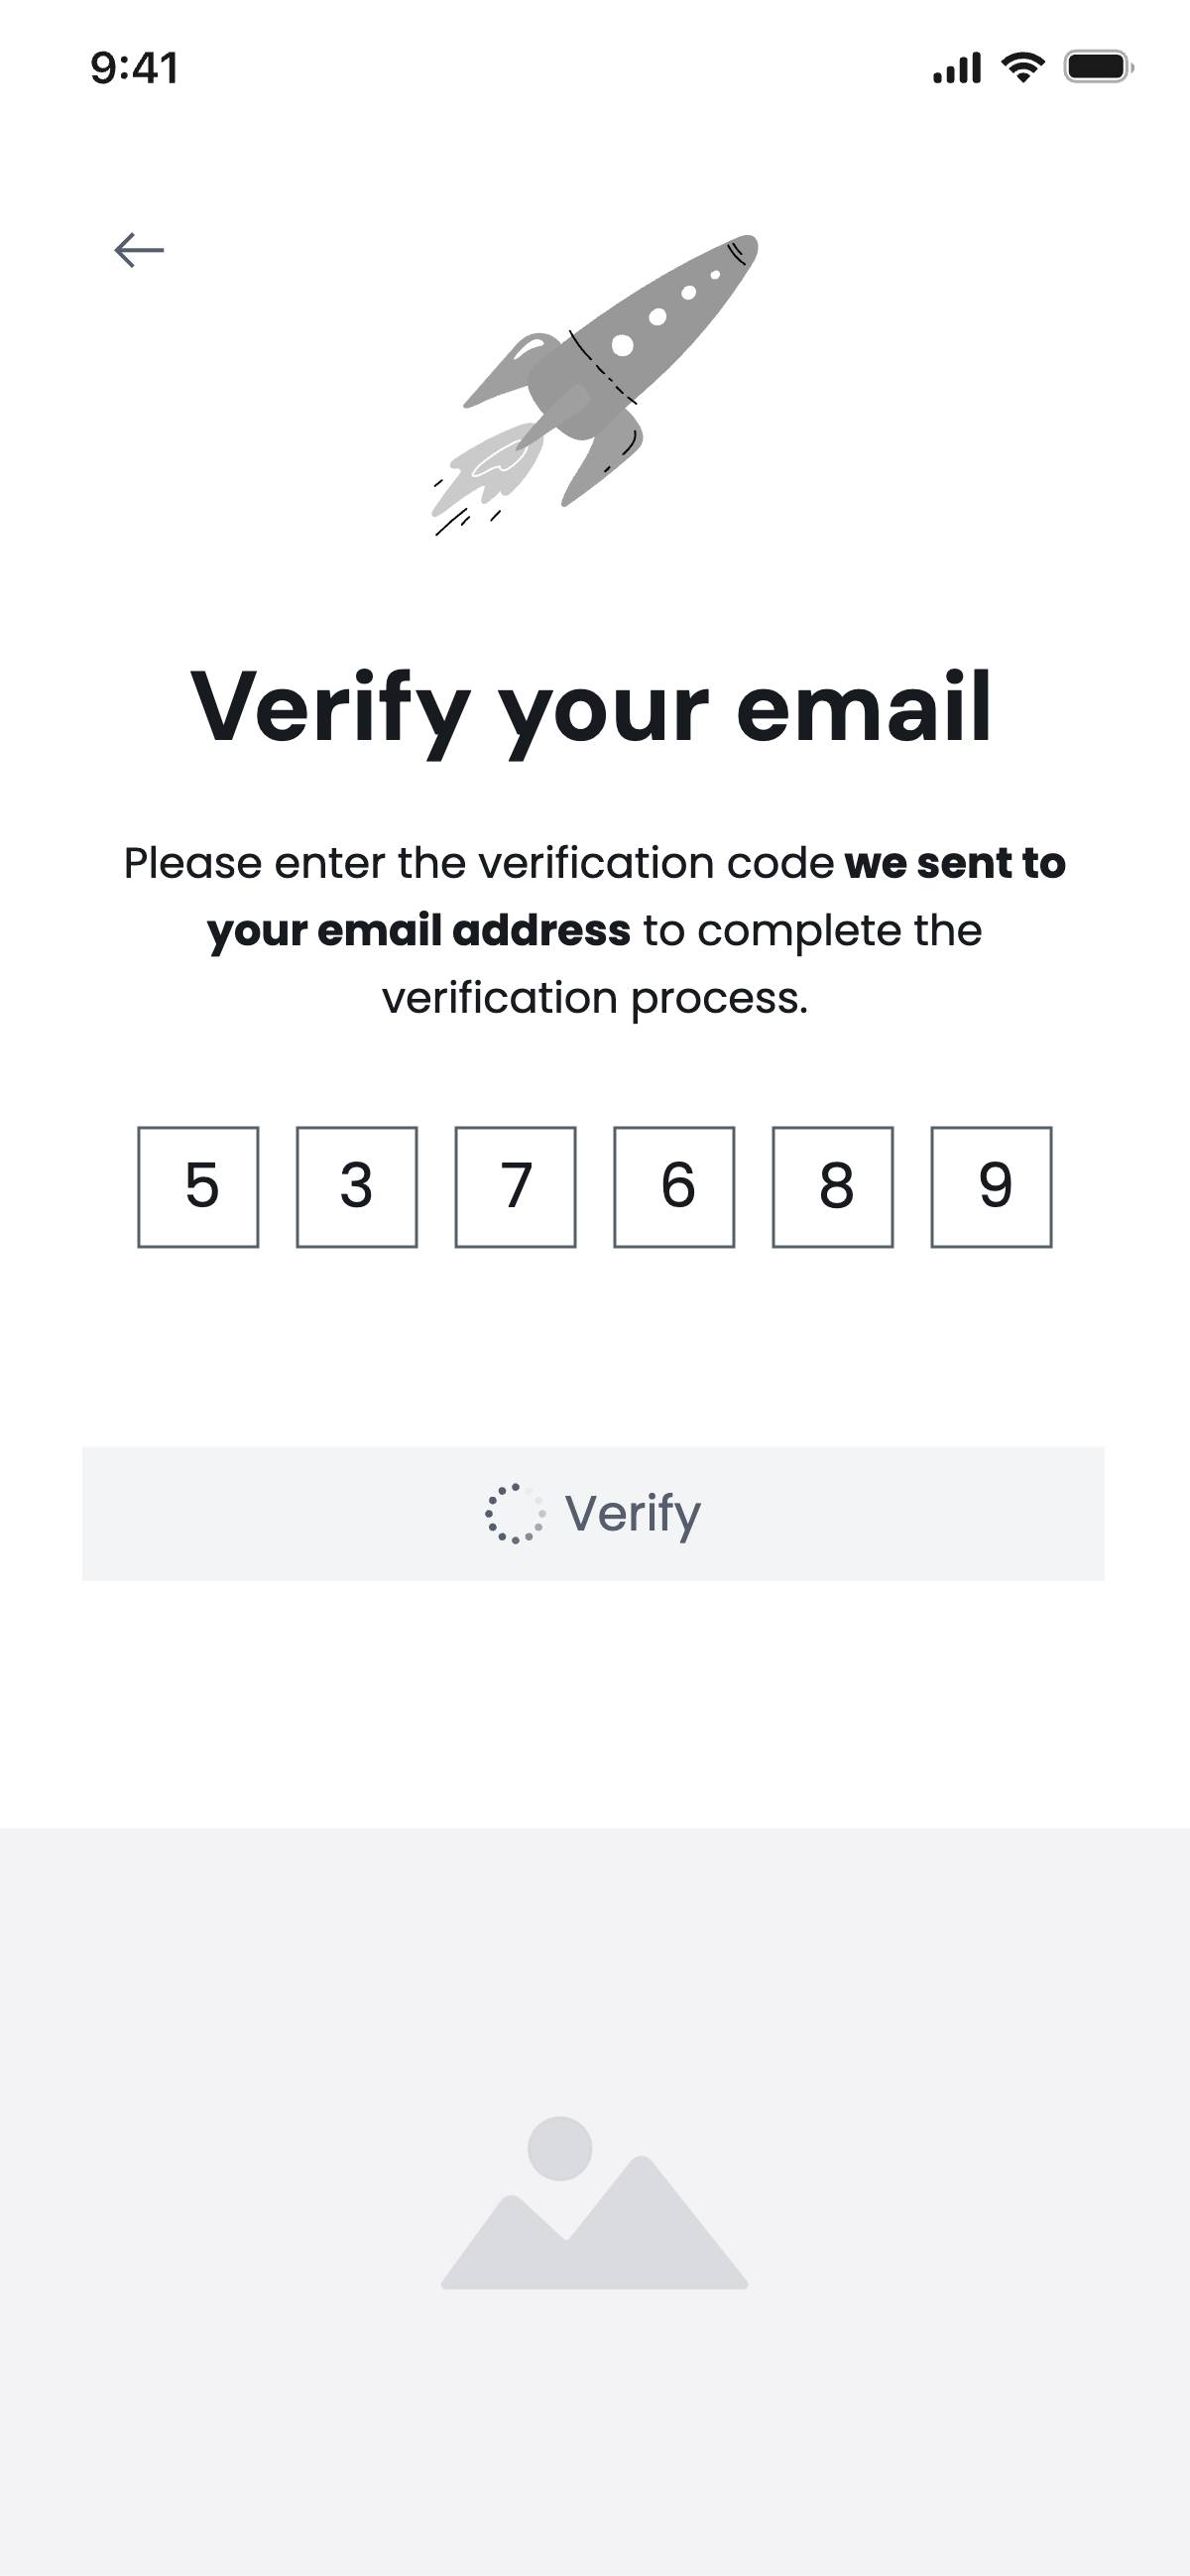 Sign up with email - Valid code